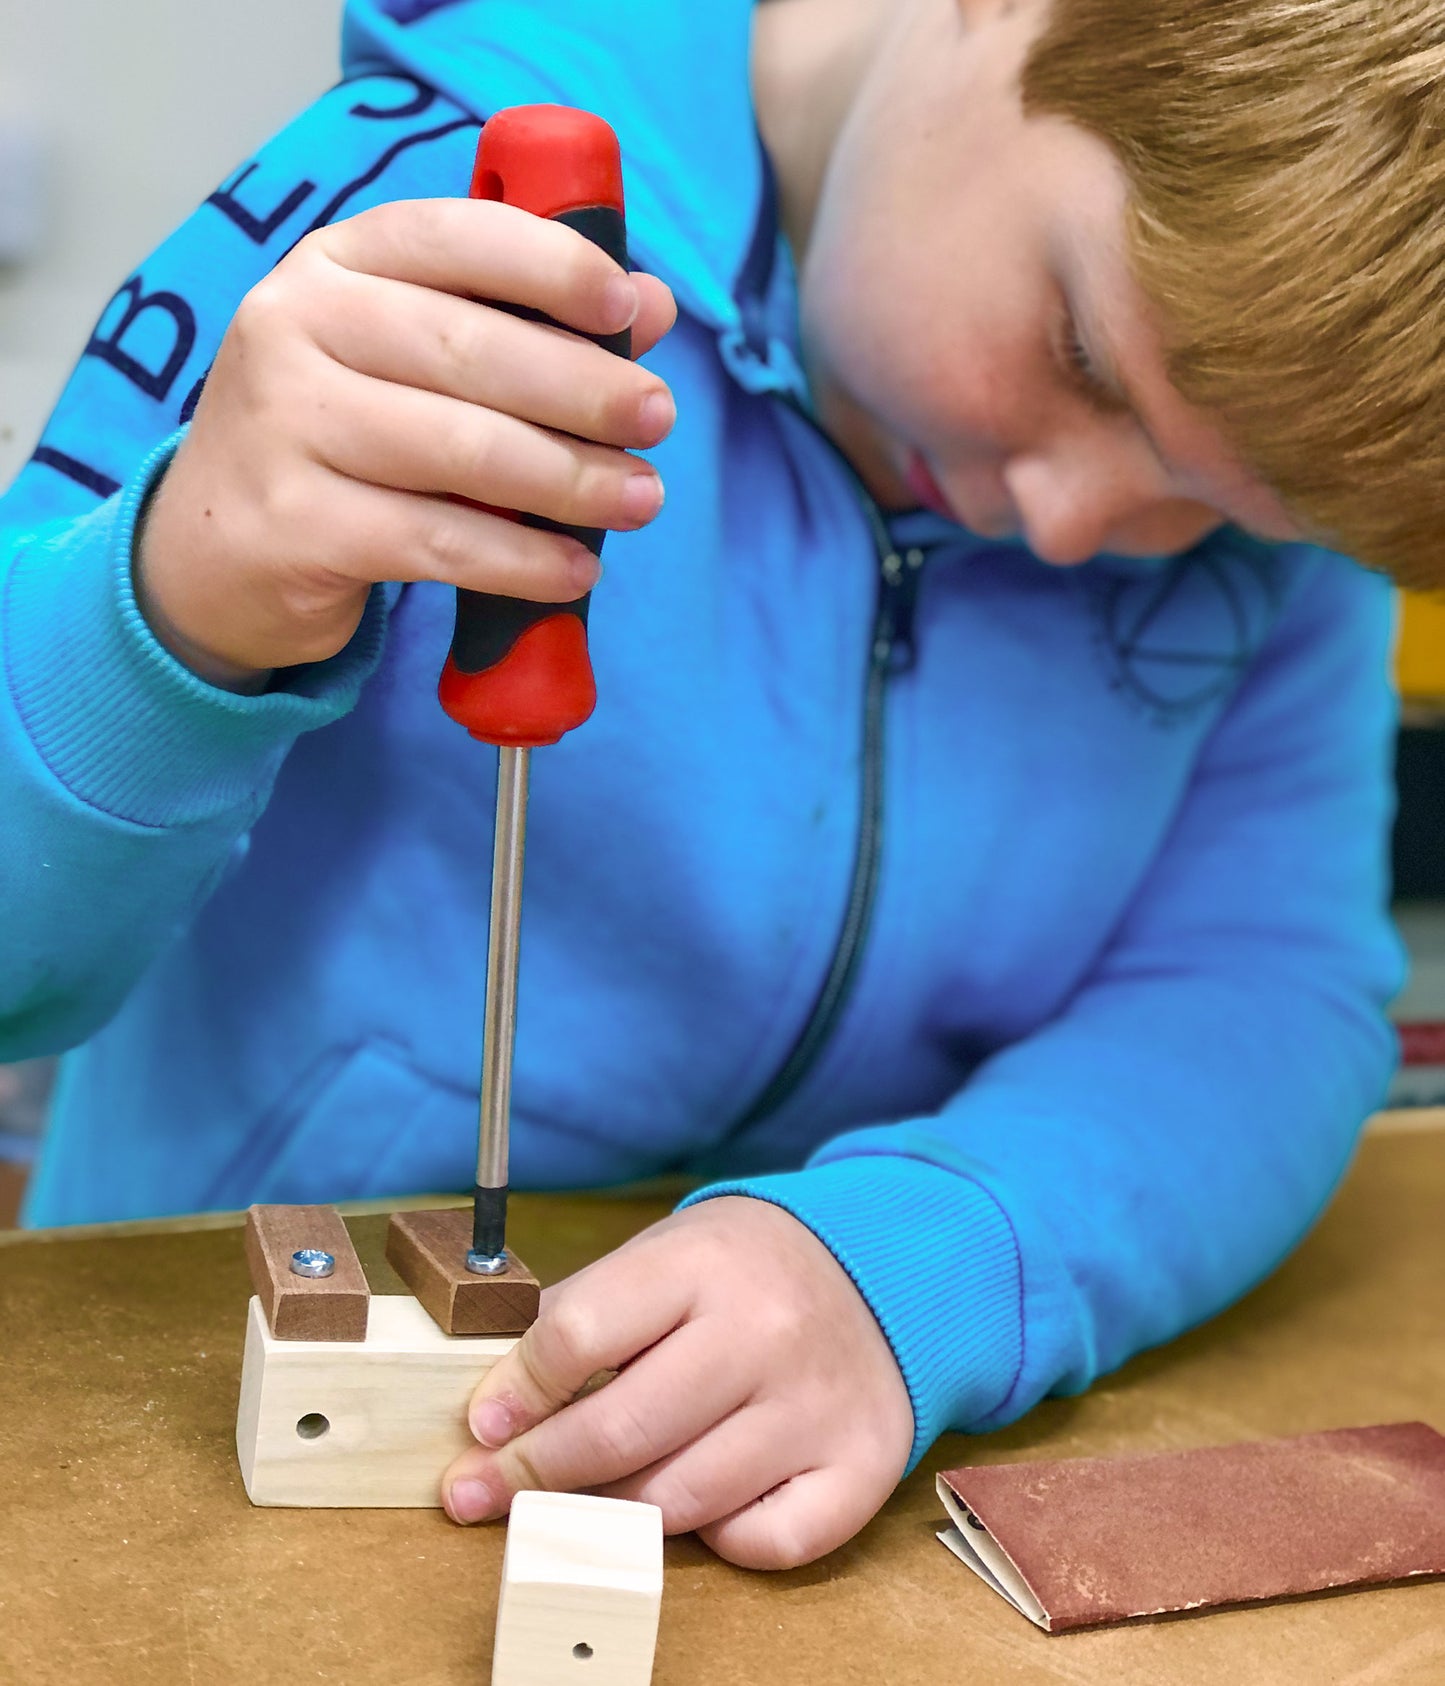 Use real tools and have a go at woodworking skills in a workshop for kids and families